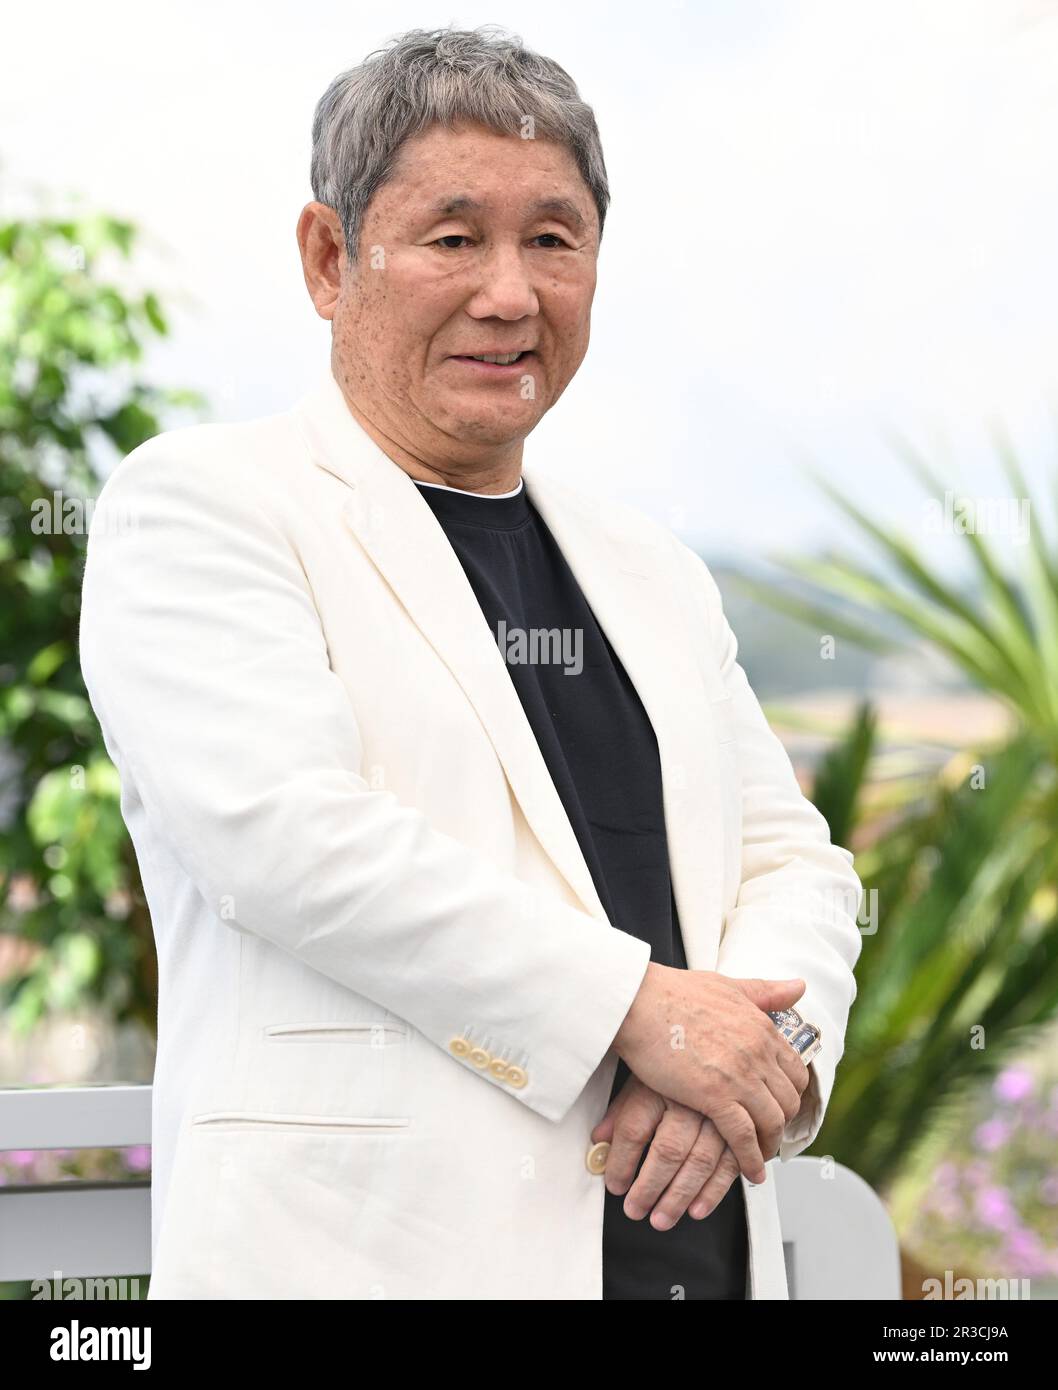 Cannes, France. 23rd May, 2023. Japanese actor/ director Takeshi Kitano attends a photo call for Kubi at the 76th Cannes Film Festival at Palais des Festivals in Cannes, France on Tuesday, May 23, 2023. Photo by Rune Hellestad/ Credit: UPI/Alamy Live News Stock Photo